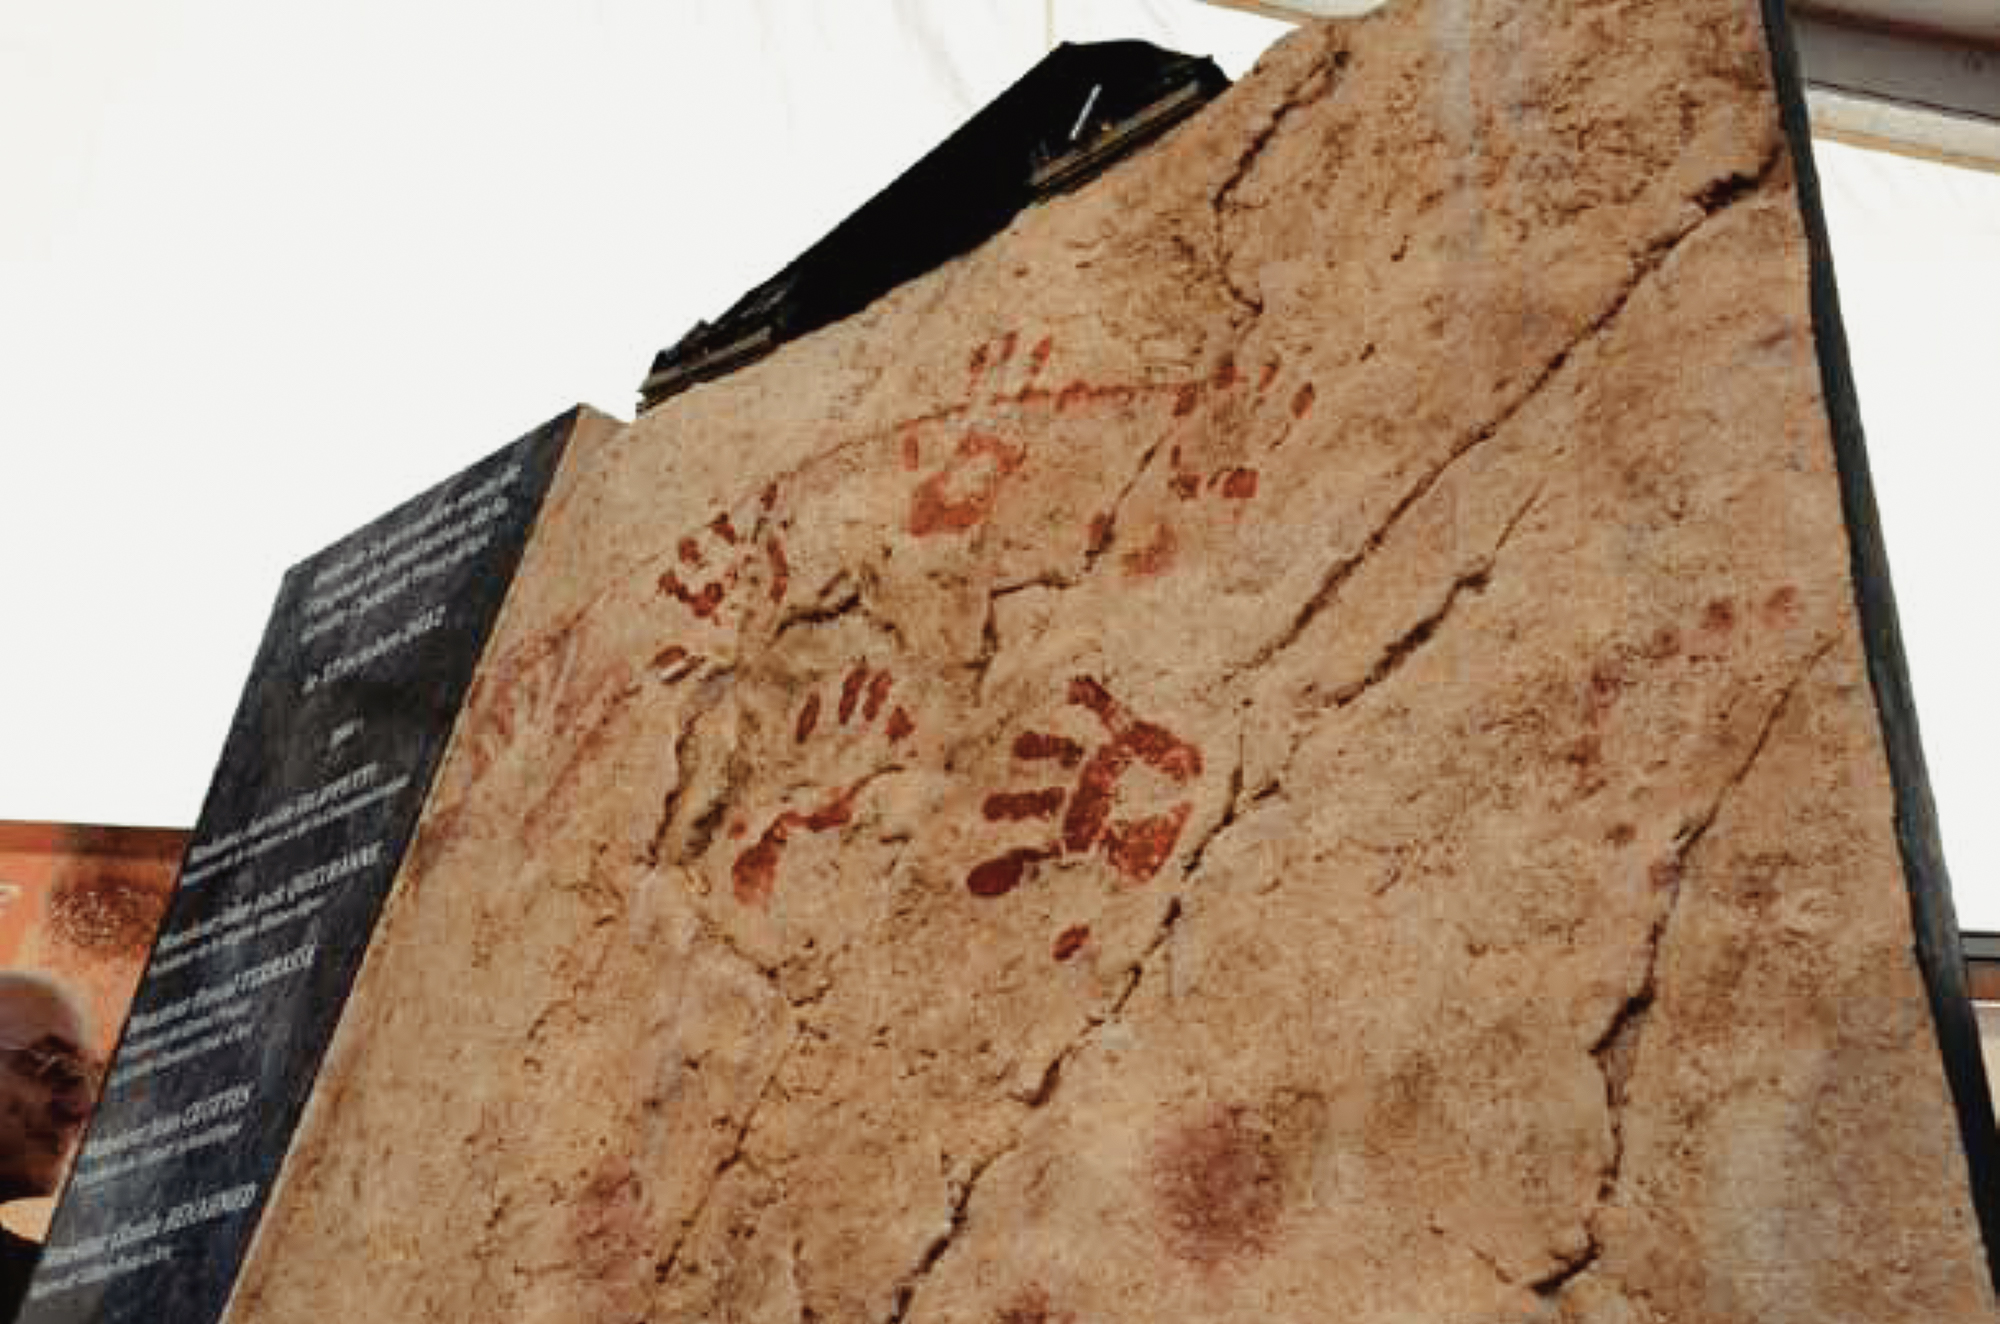 Handprints made on the occasion of the official beginning of the work for the Chauvet Cave Replica on 12 October 2012